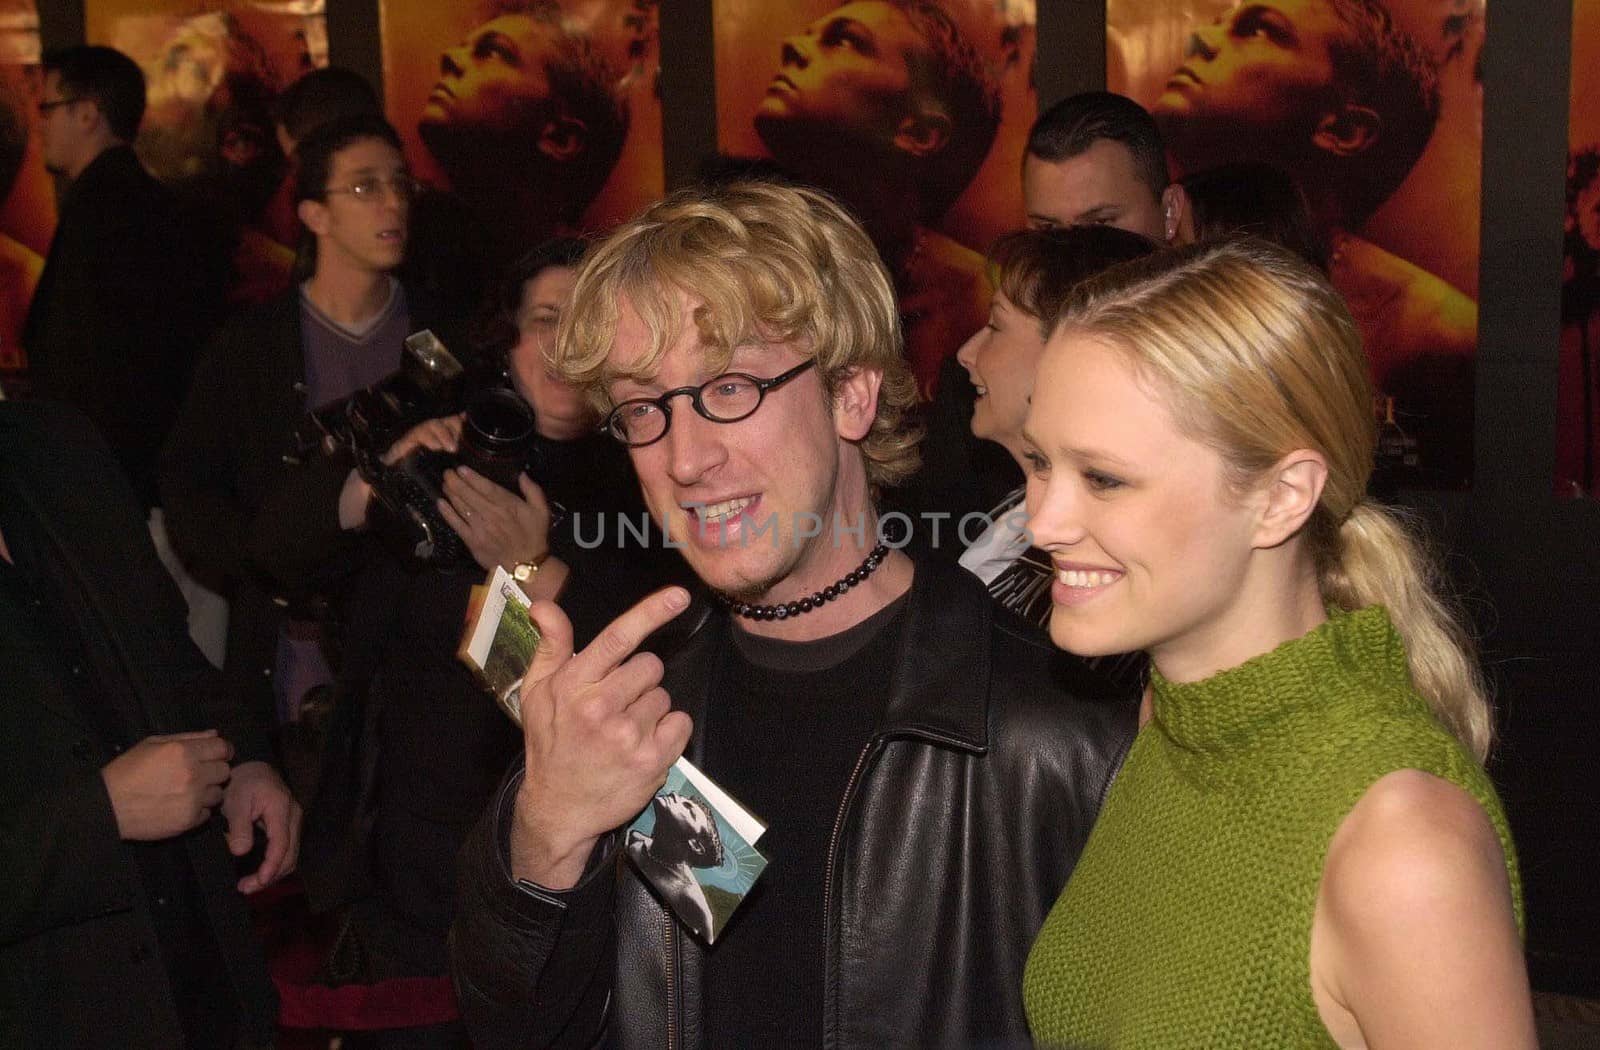 Andy Dick and Date at the premiere of Twentieth Century Fox's "The Beach" in Hollywood, 02-02-00